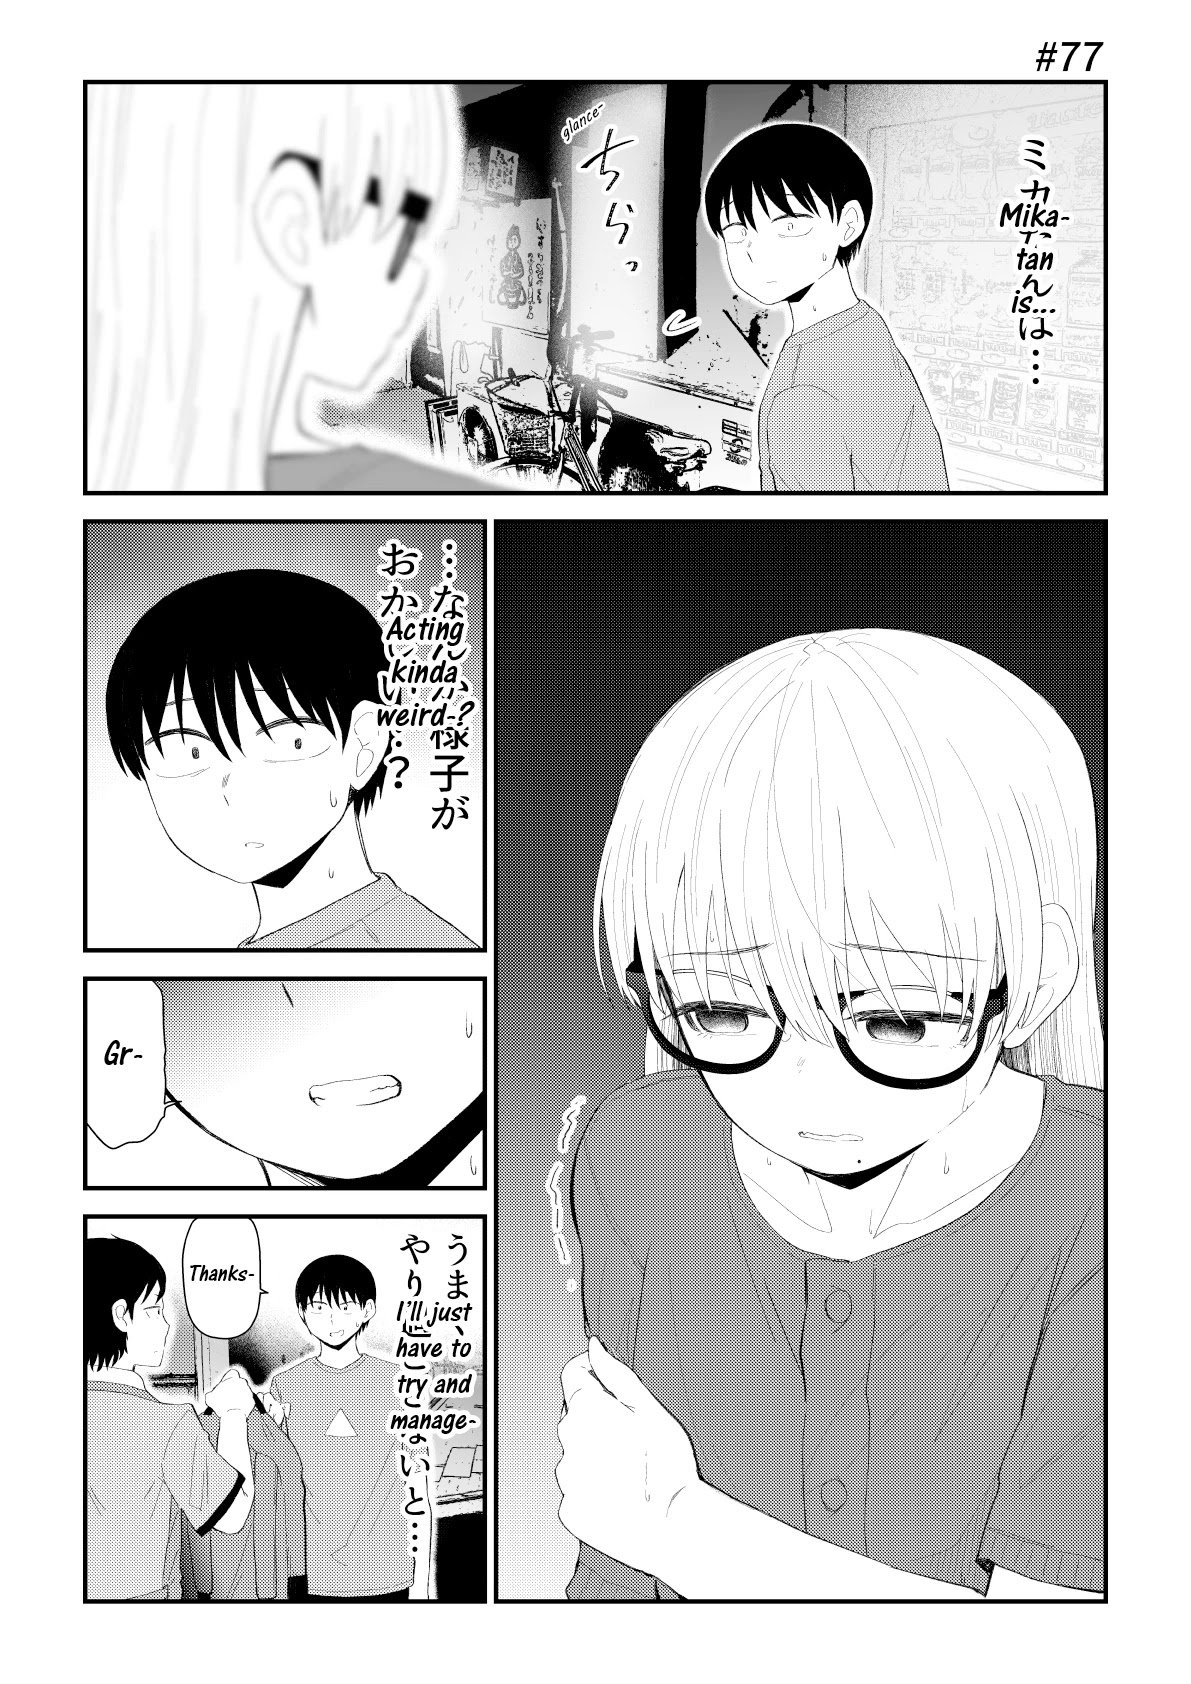 His Favorite Idol Moves in Next Door, the Romcom - chapter 77 - #1